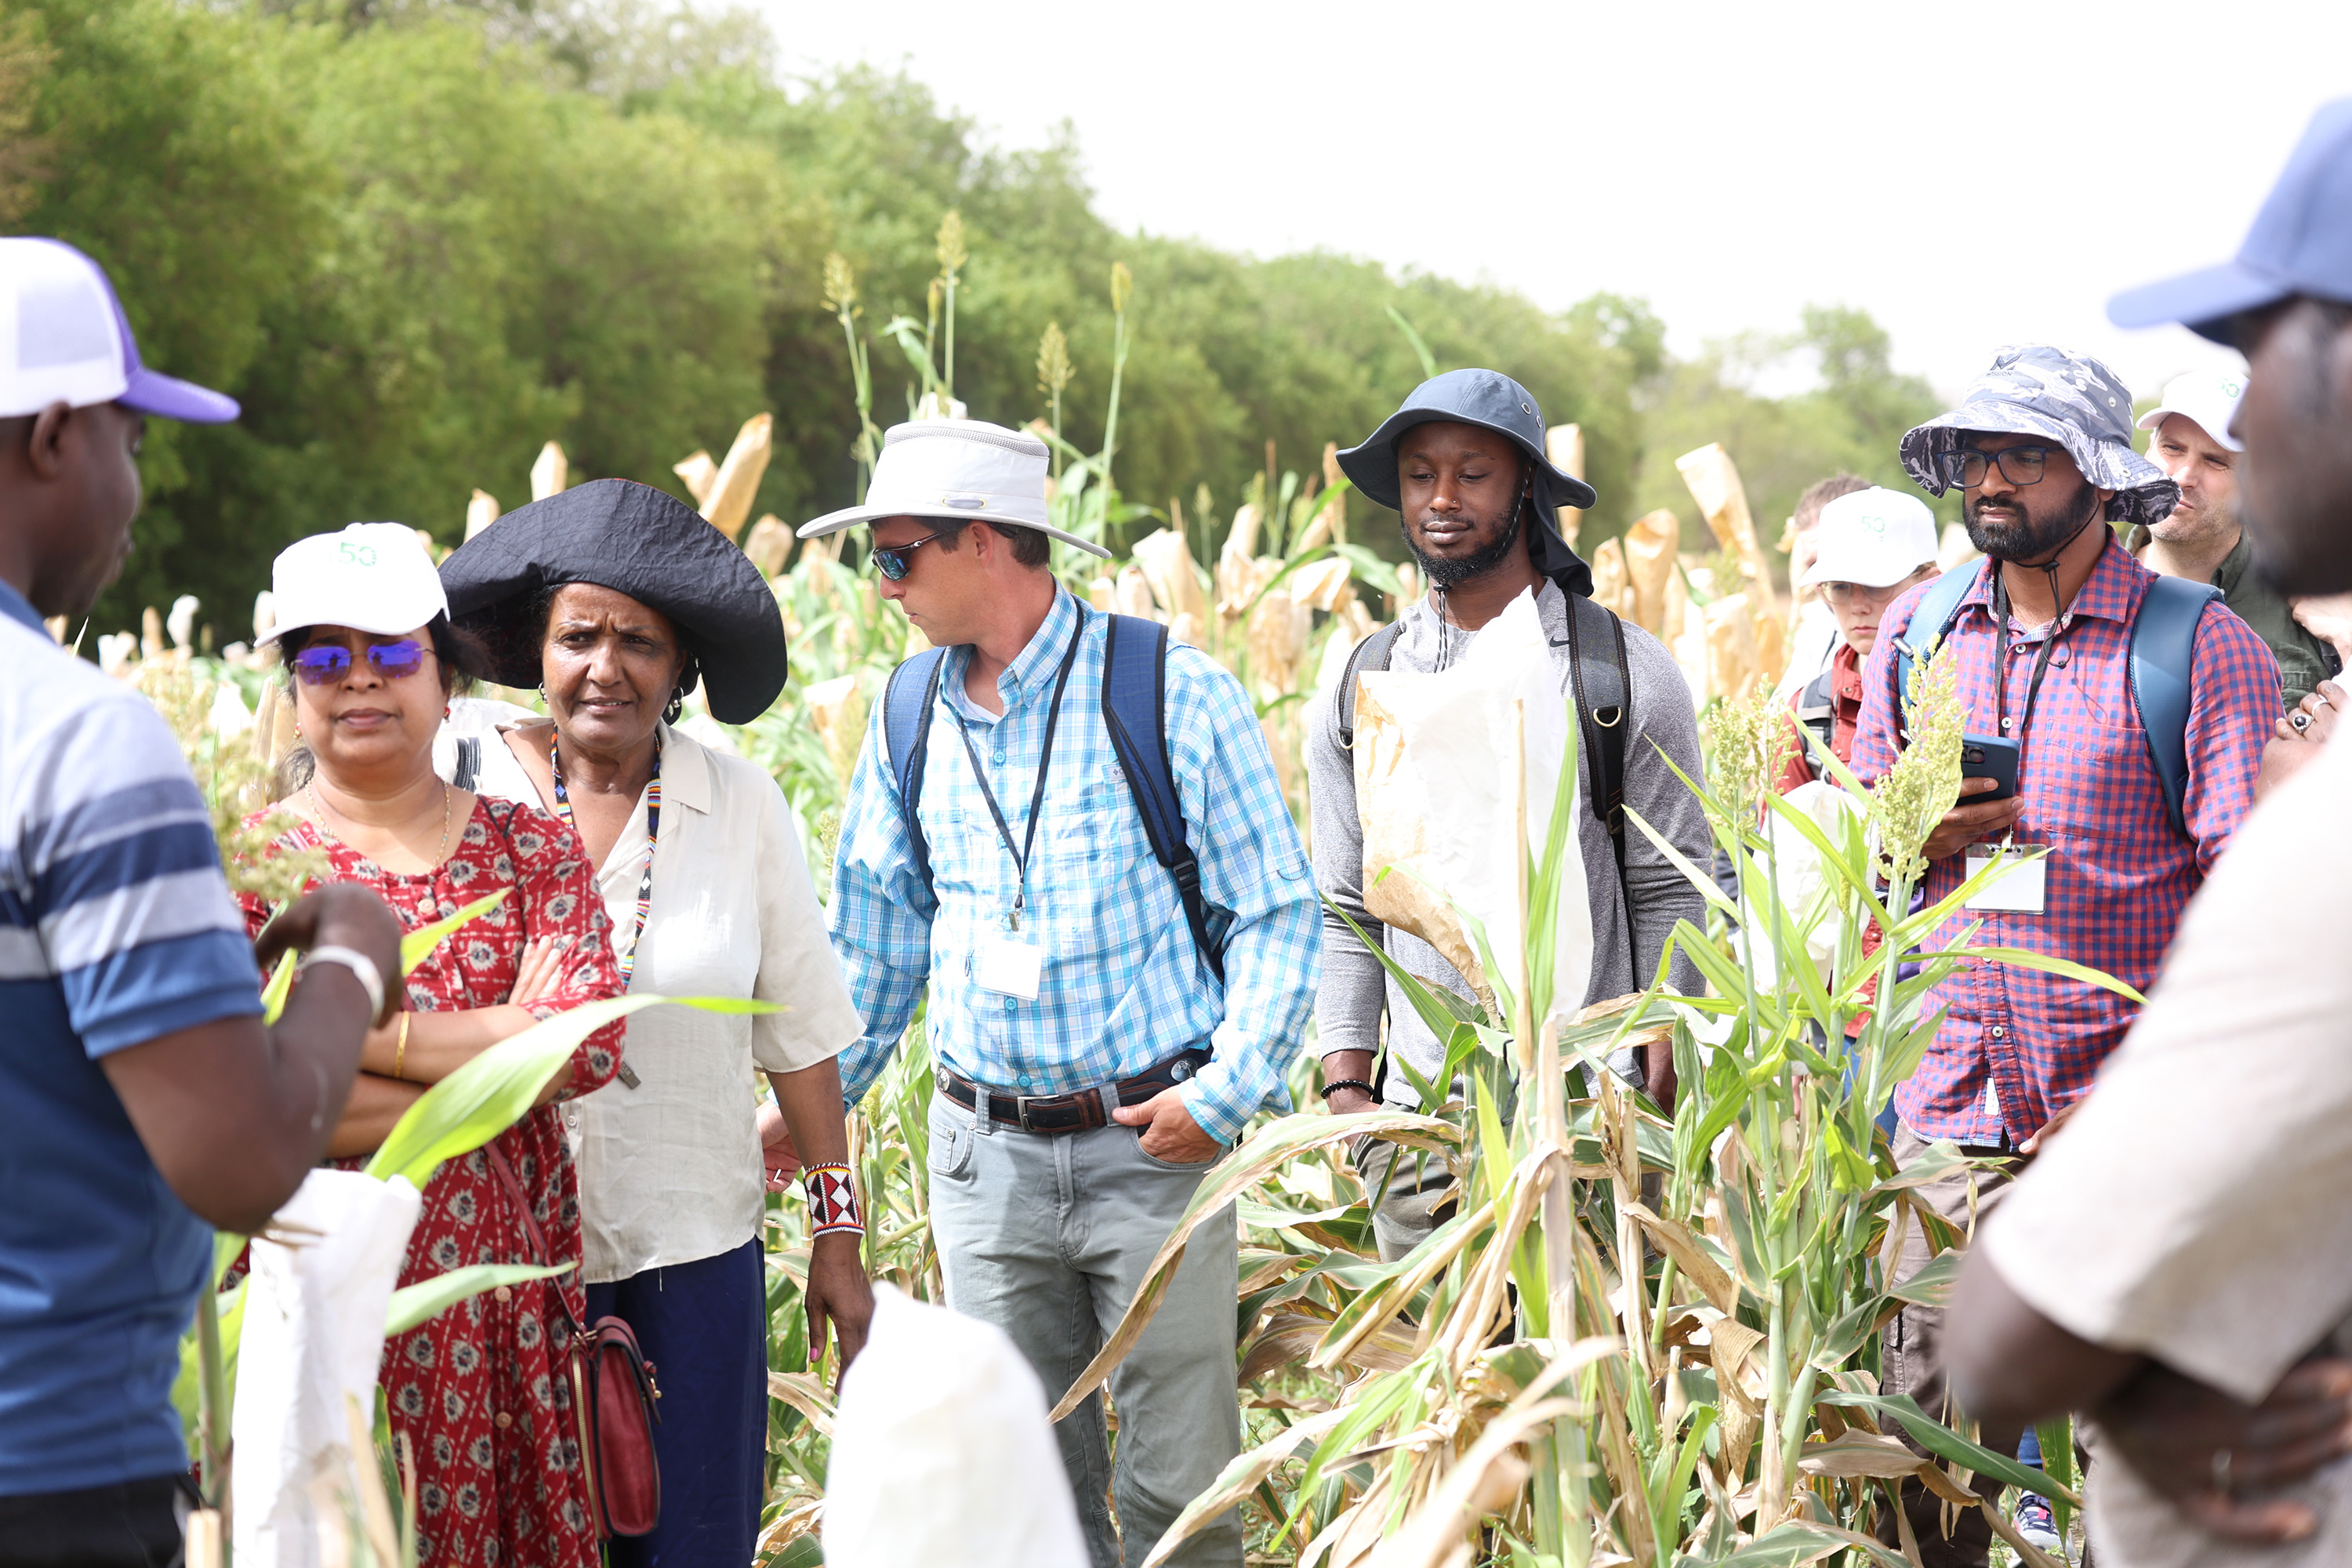 The DSU research team join Senegalese researchers at Sorghum breeding plots in Thies, Senegal.